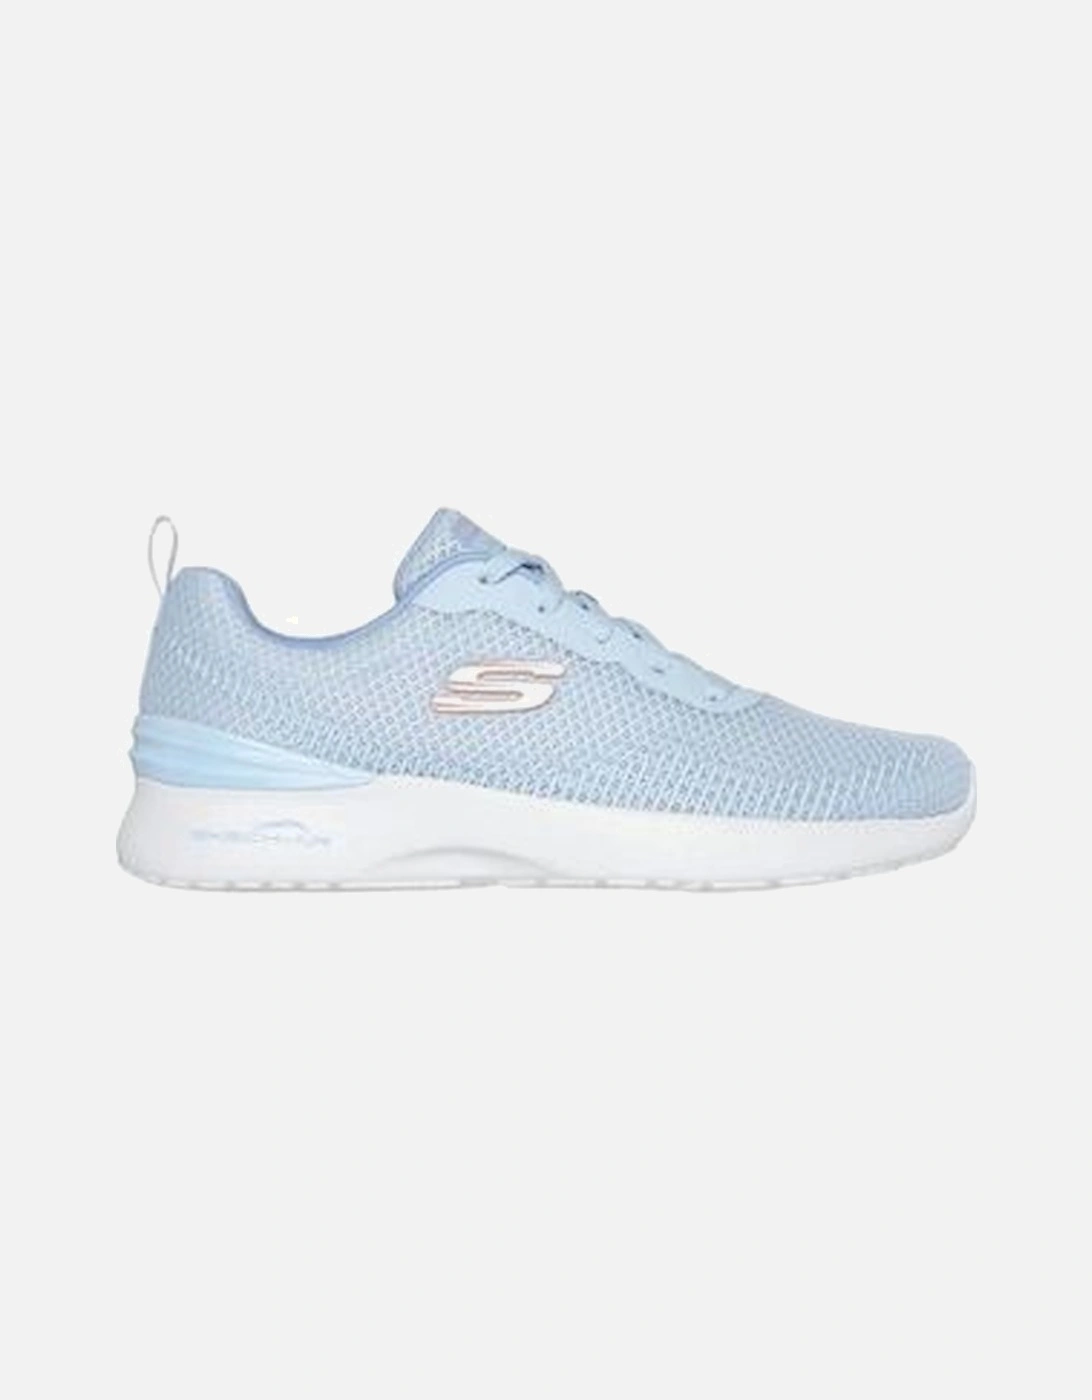 149758 Skech Air Dynamight in light blue, 2 of 1